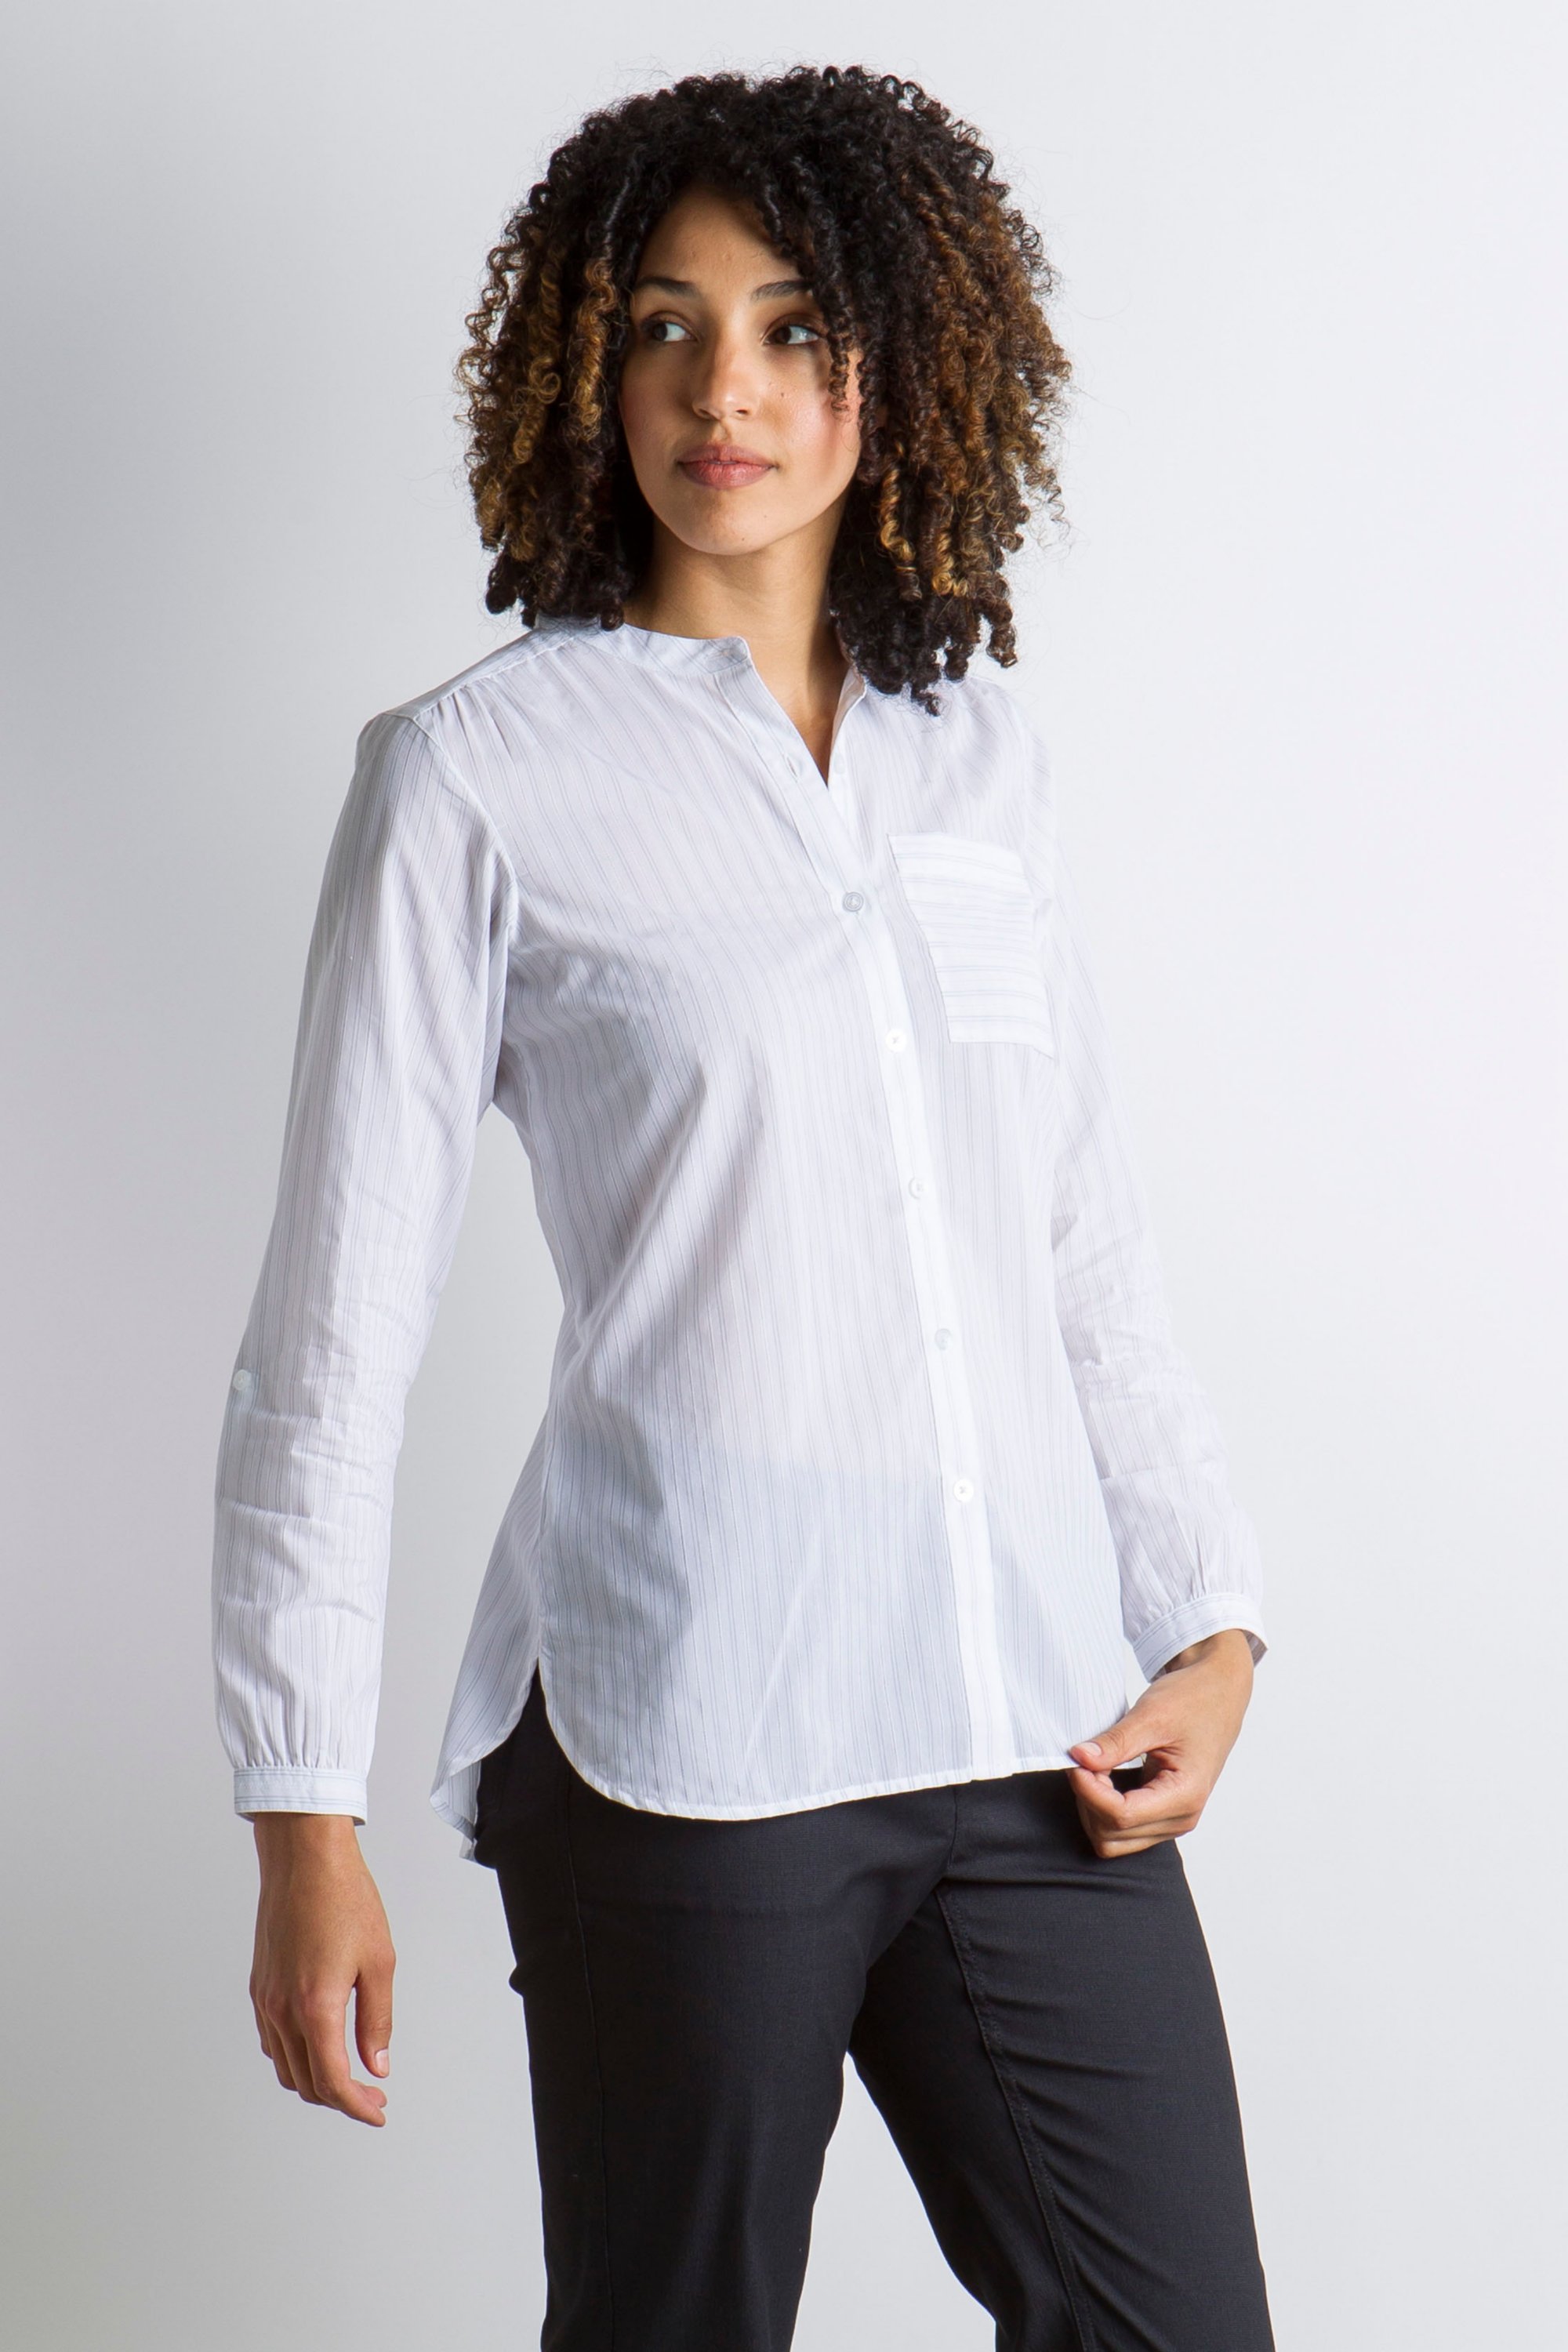  ExOfficio Women's Lencia Relaxed Fit Long-Sleeve Shirt, Ink,  X-small : ExOfficio: Clothing, Shoes & Jewelry